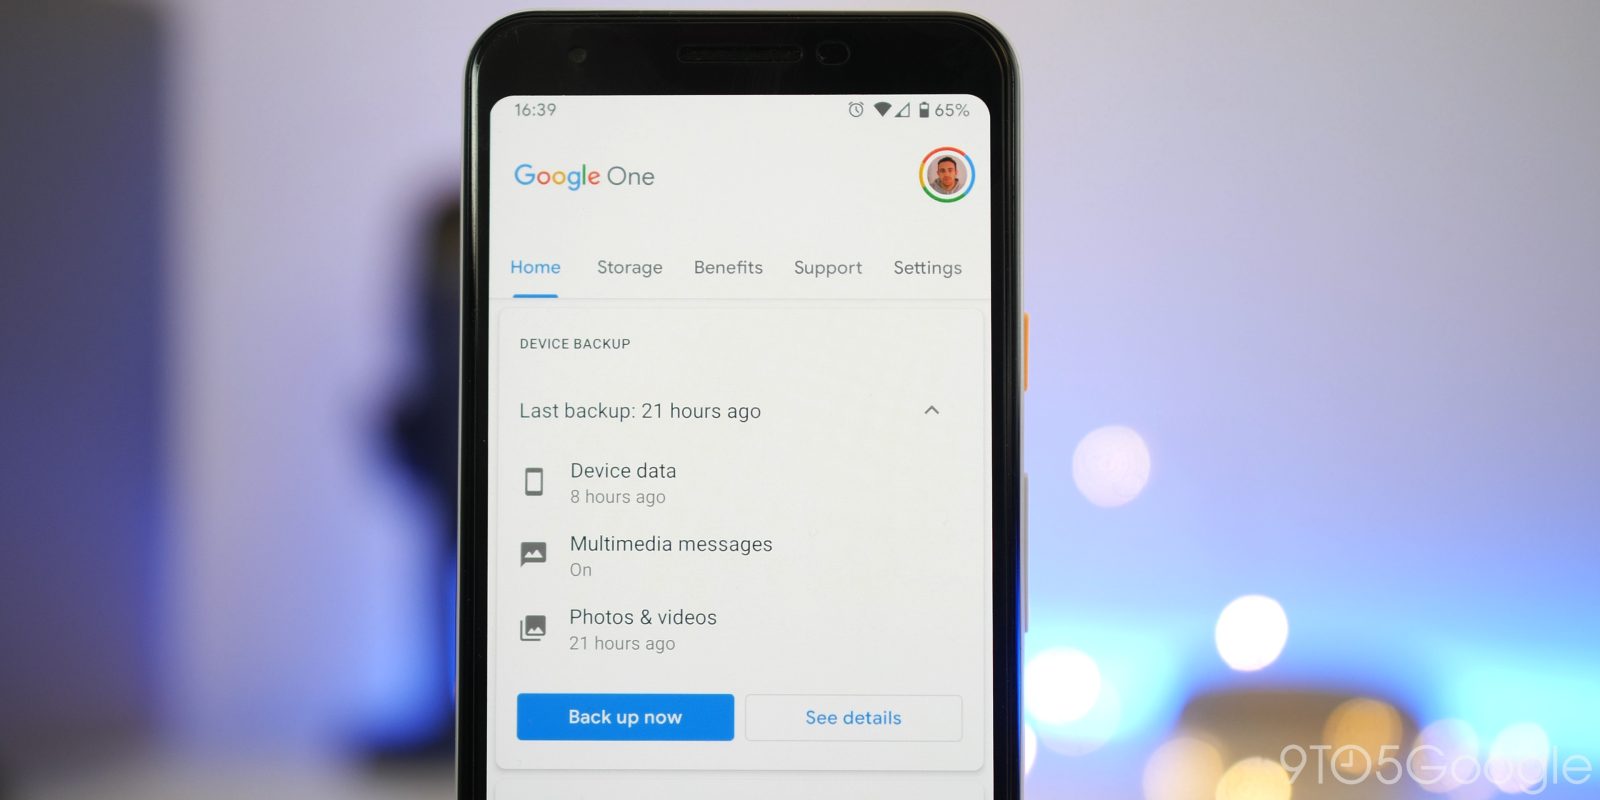 How to backup Android phone using Google One